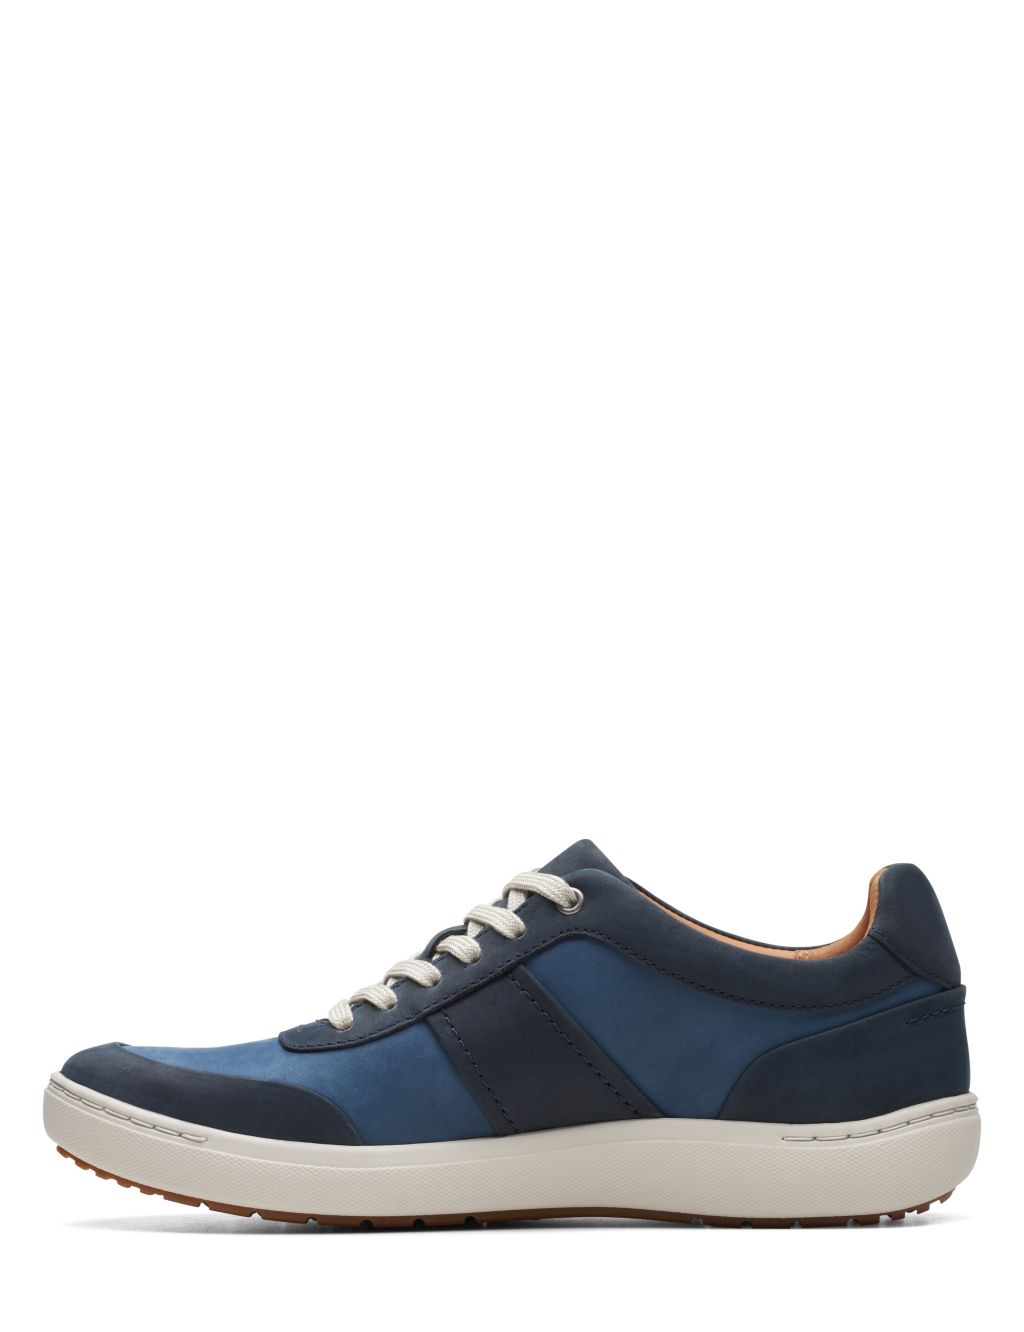 Leather Lace Up Colour Block Trainers image 6